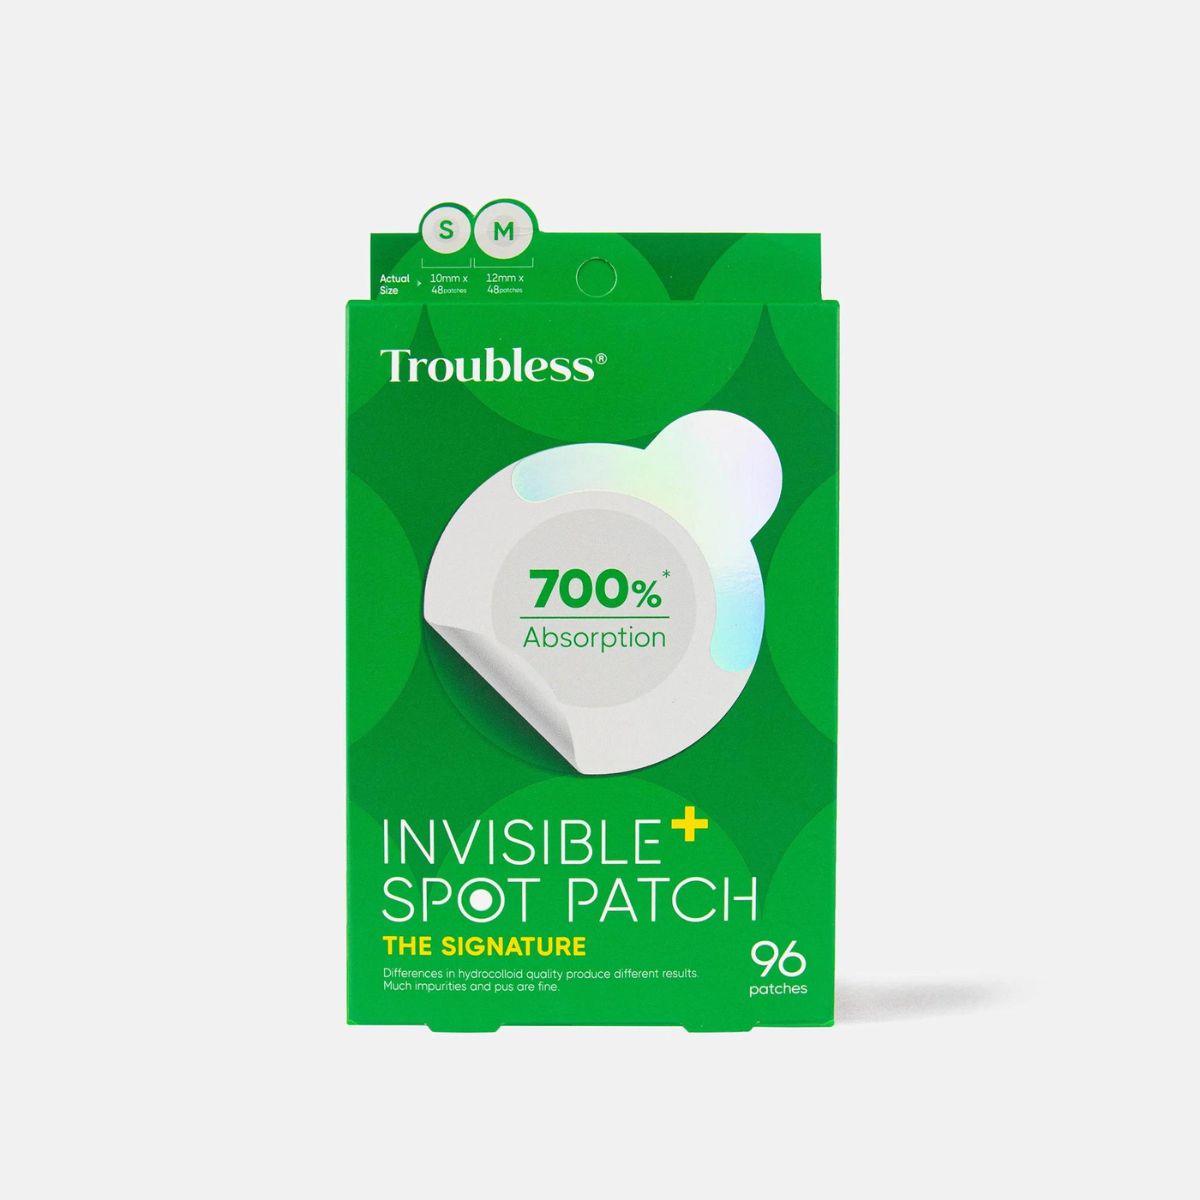 TROUBLESS INVISIBLE SPOT PATCH THE SIGNATURE